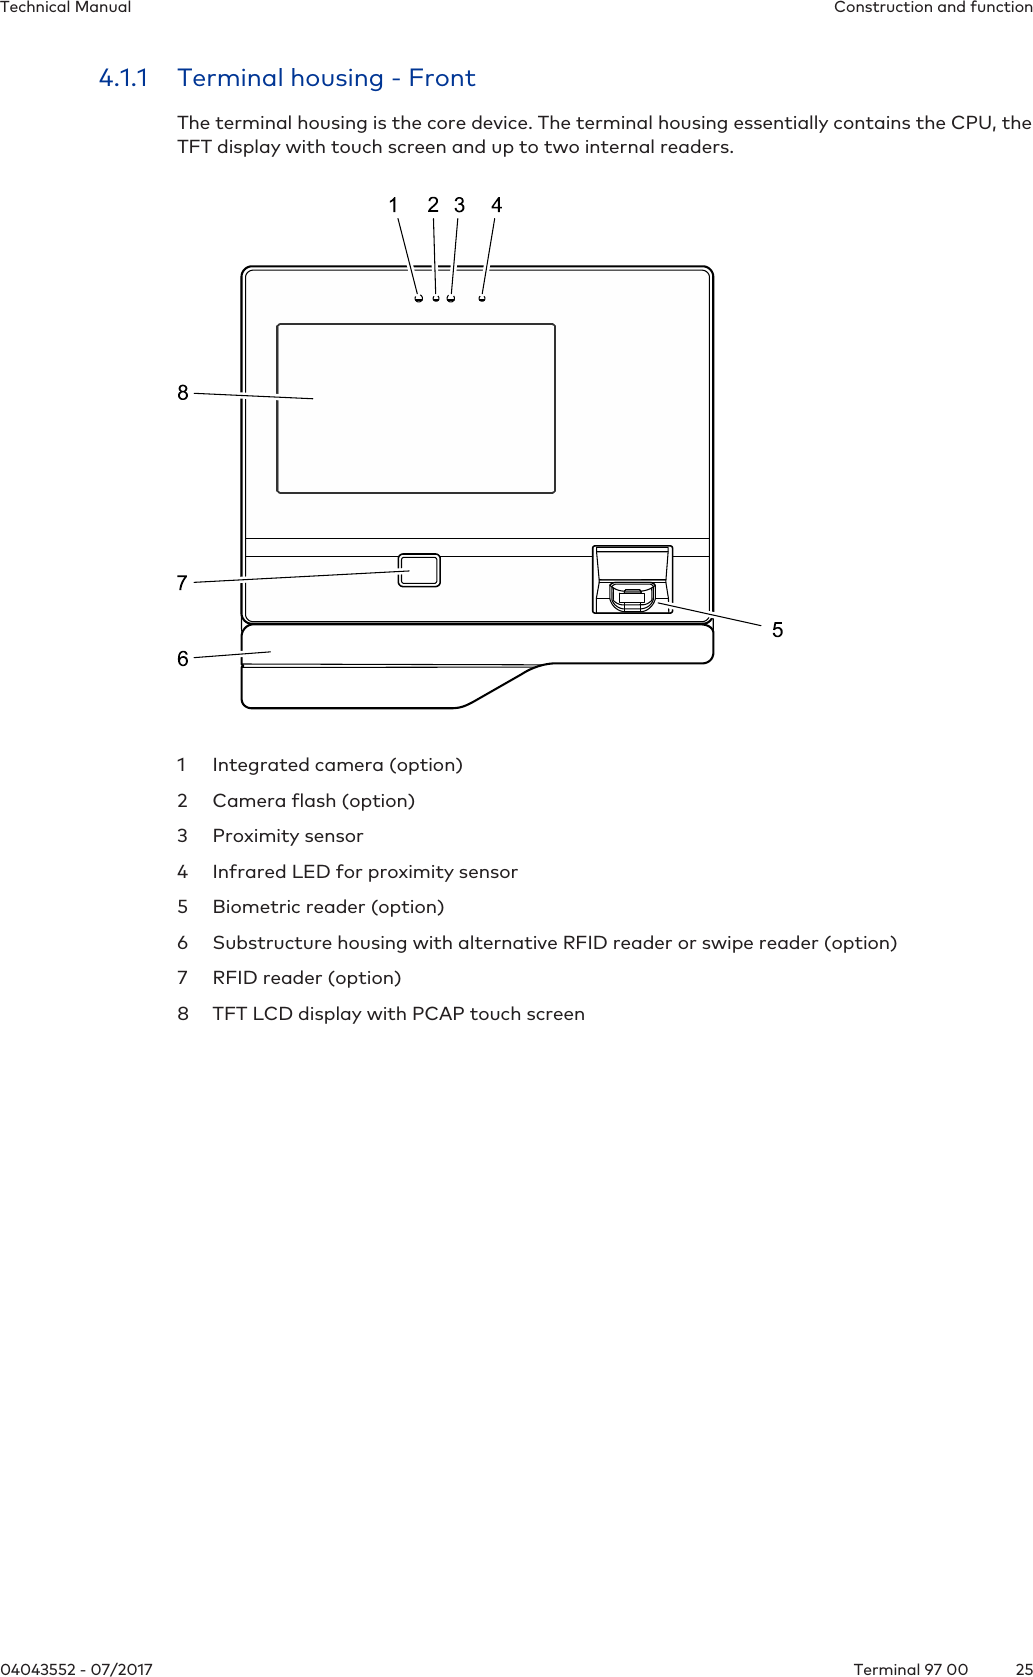 Construction and functionTechnical Manual2504043552 - 07/2017 Terminal 97 004.1.1 Terminal housing - FrontThe terminal housing is the core device. The terminal housing essentially contains the CPU, theTFT display with touch screen and up to two internal readers.1 Integrated camera (option)2 Camera flash (option)3 Proximity sensor4 Infrared LED for proximity sensor5 Biometric reader (option)6 Substructure housing with alternative RFID reader or swipe reader (option)7 RFID reader (option)8 TFT LCD display with PCAP touch screen